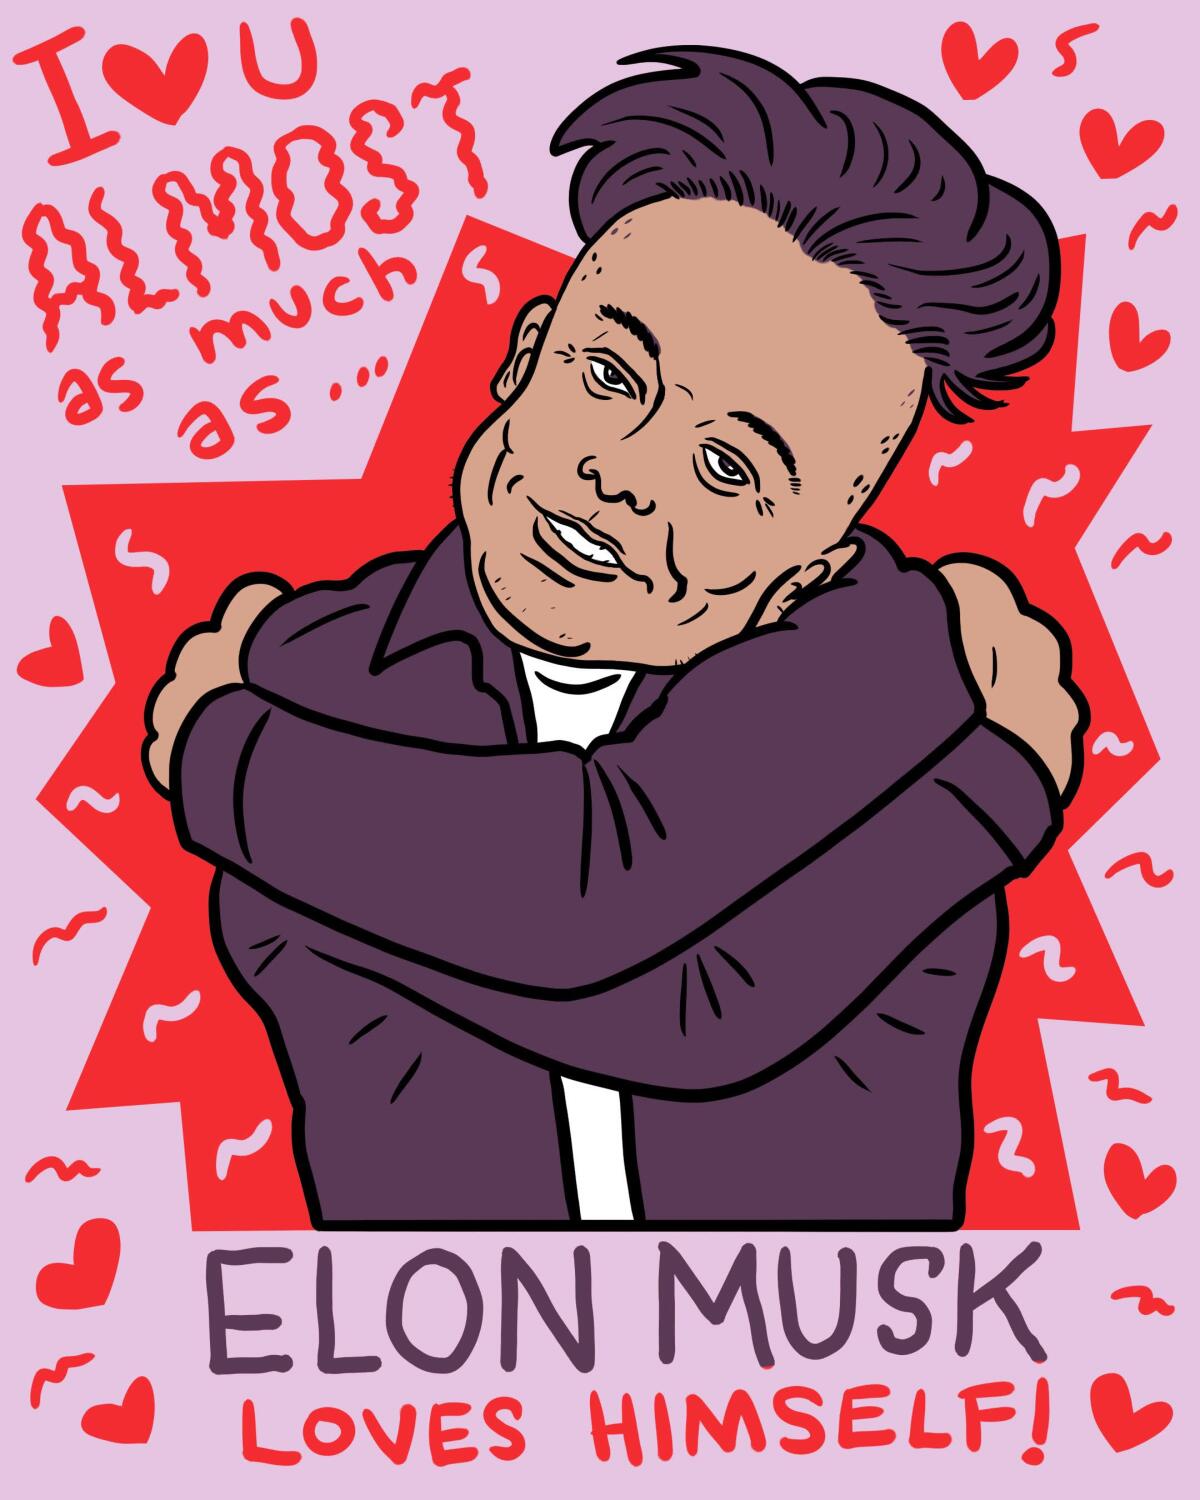 A Valentine's Day card with an illustration of Elon Musk hugging himself. 